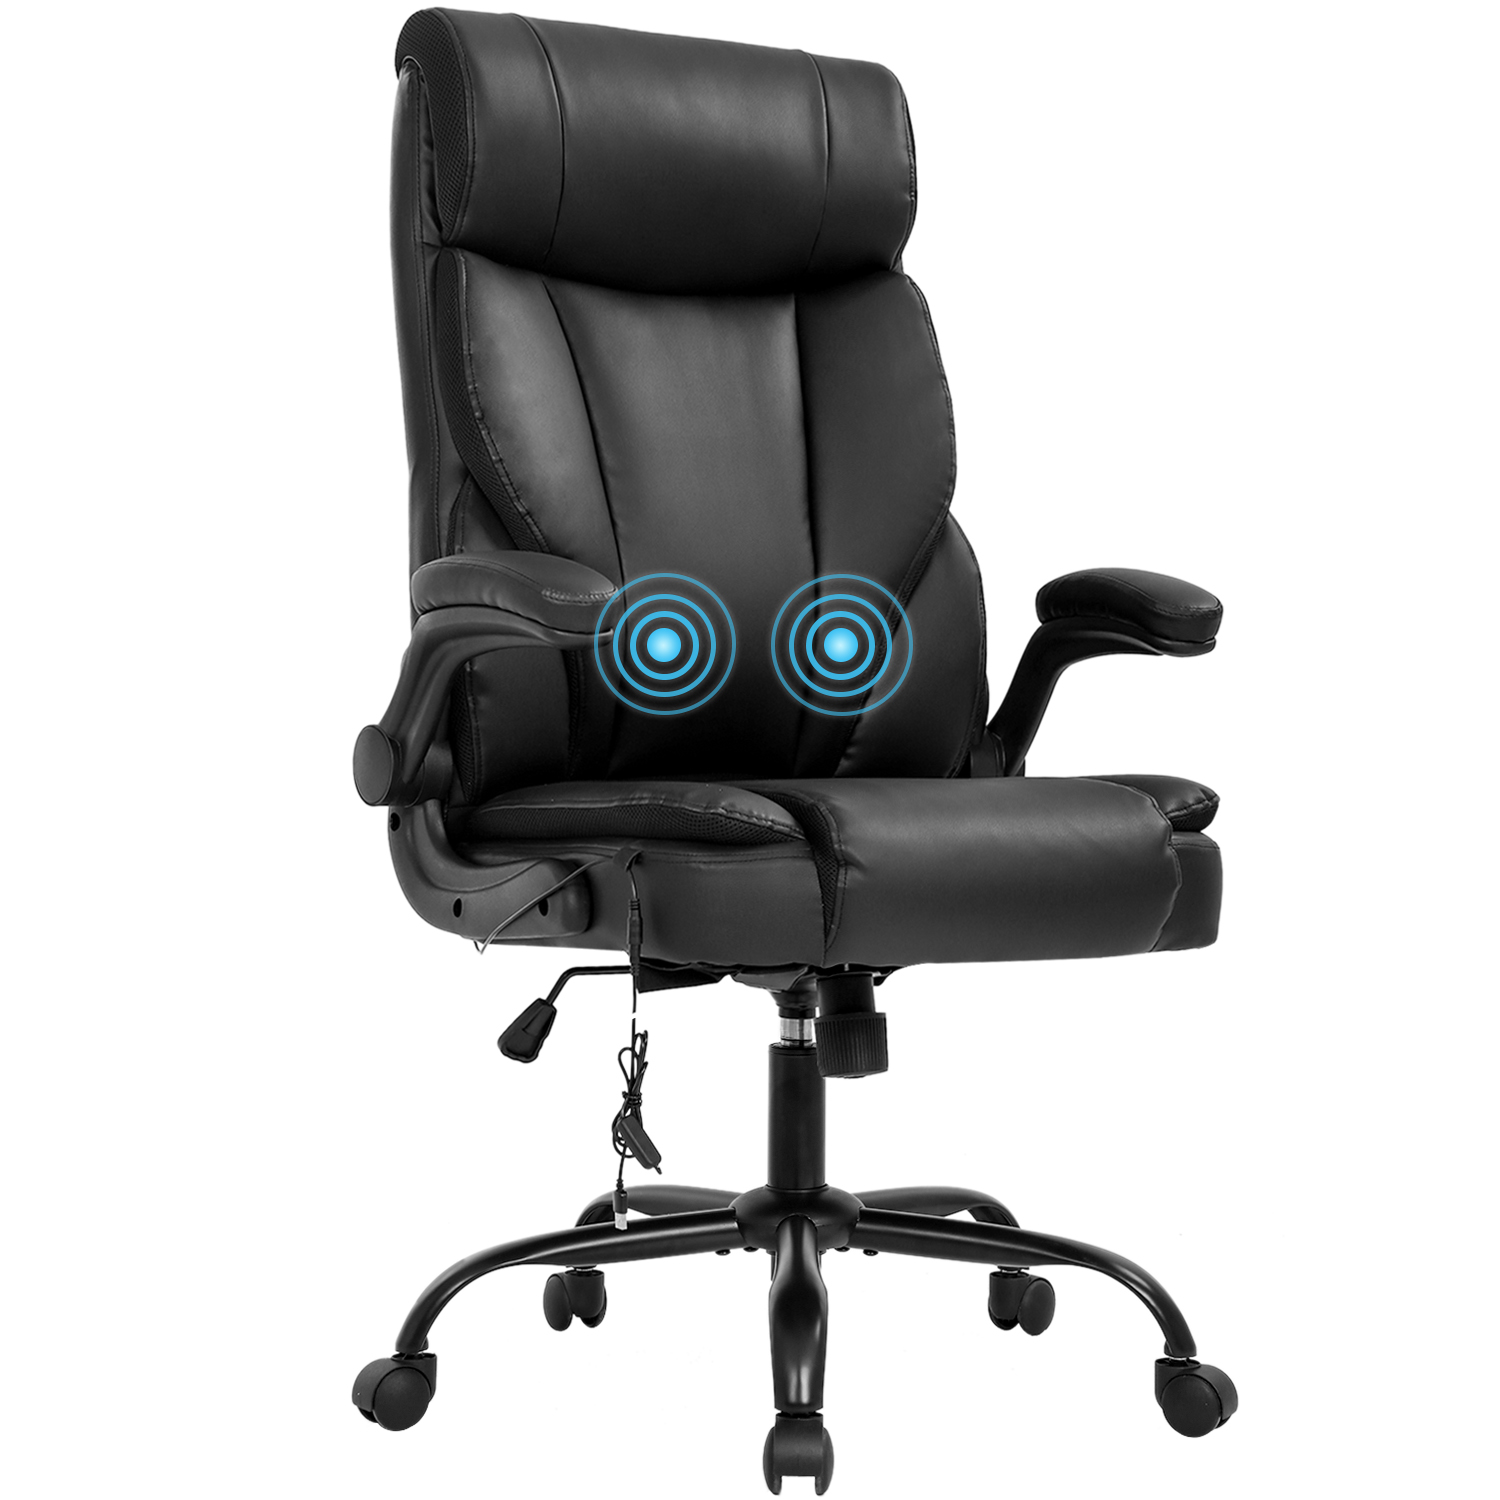 BestOffice Office Chair Ergonomic Desk Chair PU Leather Massage Computer Chair with Lumbar Support Flip up Armrest Task Chair Rolling Swivel Executive Chair for Adults(Black) - image 1 of 7